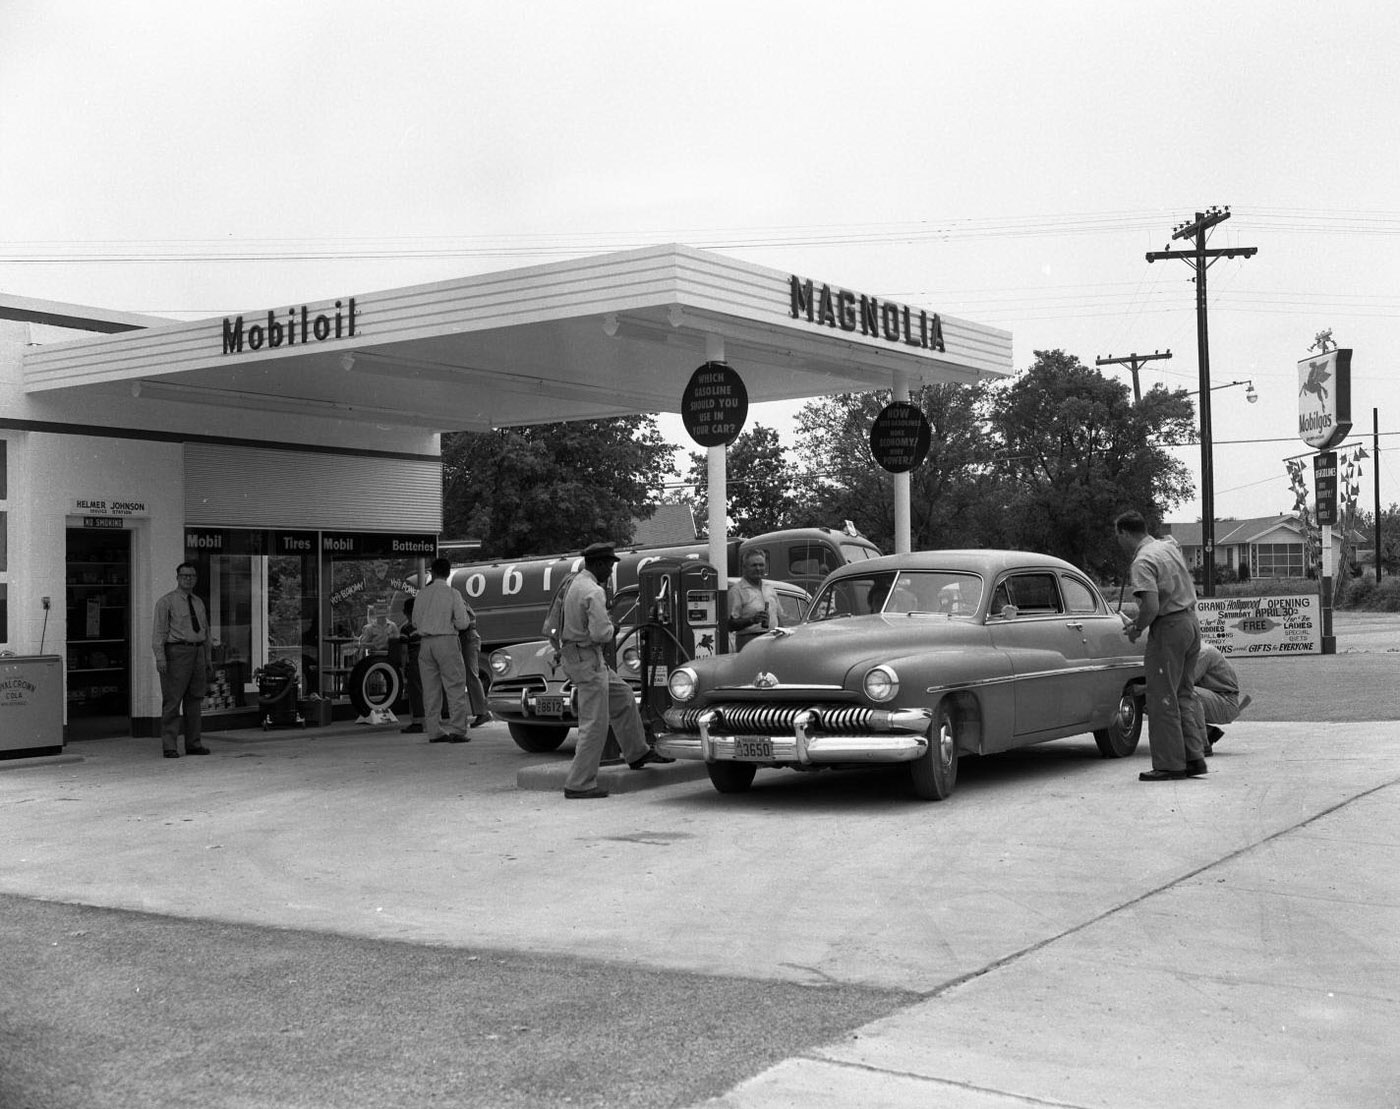 Grand Opening of Magnolia Mobil Service Station, 1955.